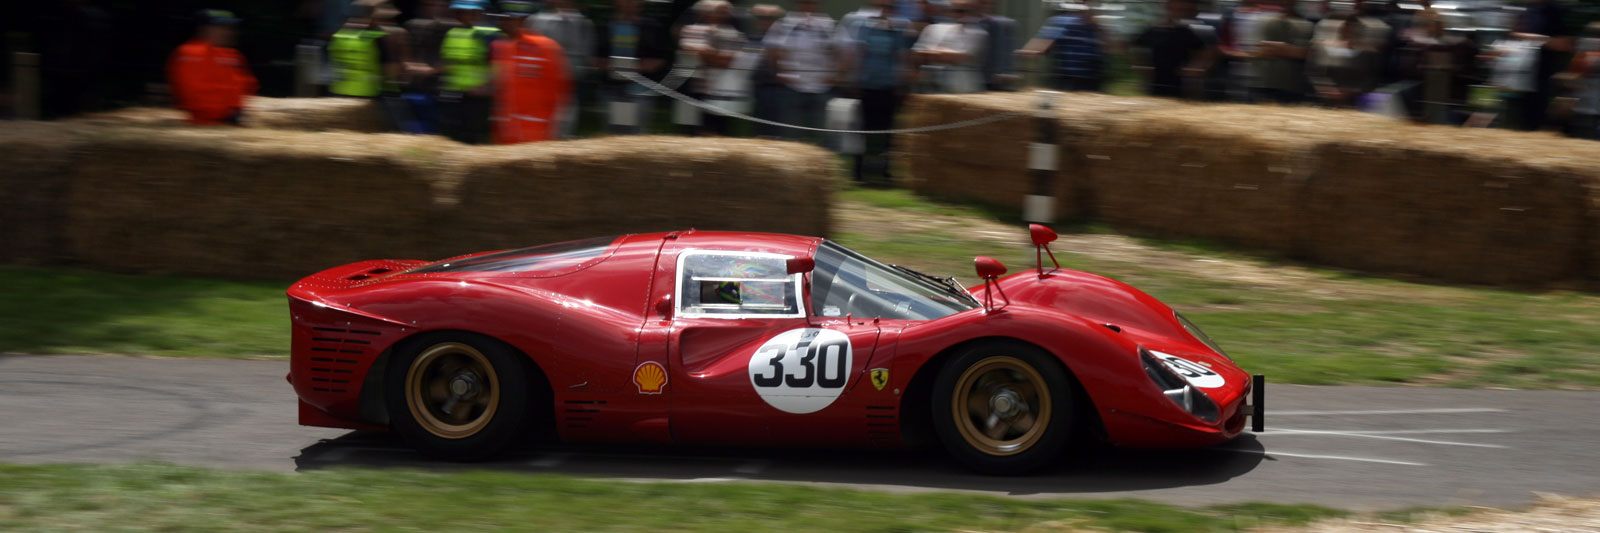 Goodwood Festival of Speed with Grand Prix Tours